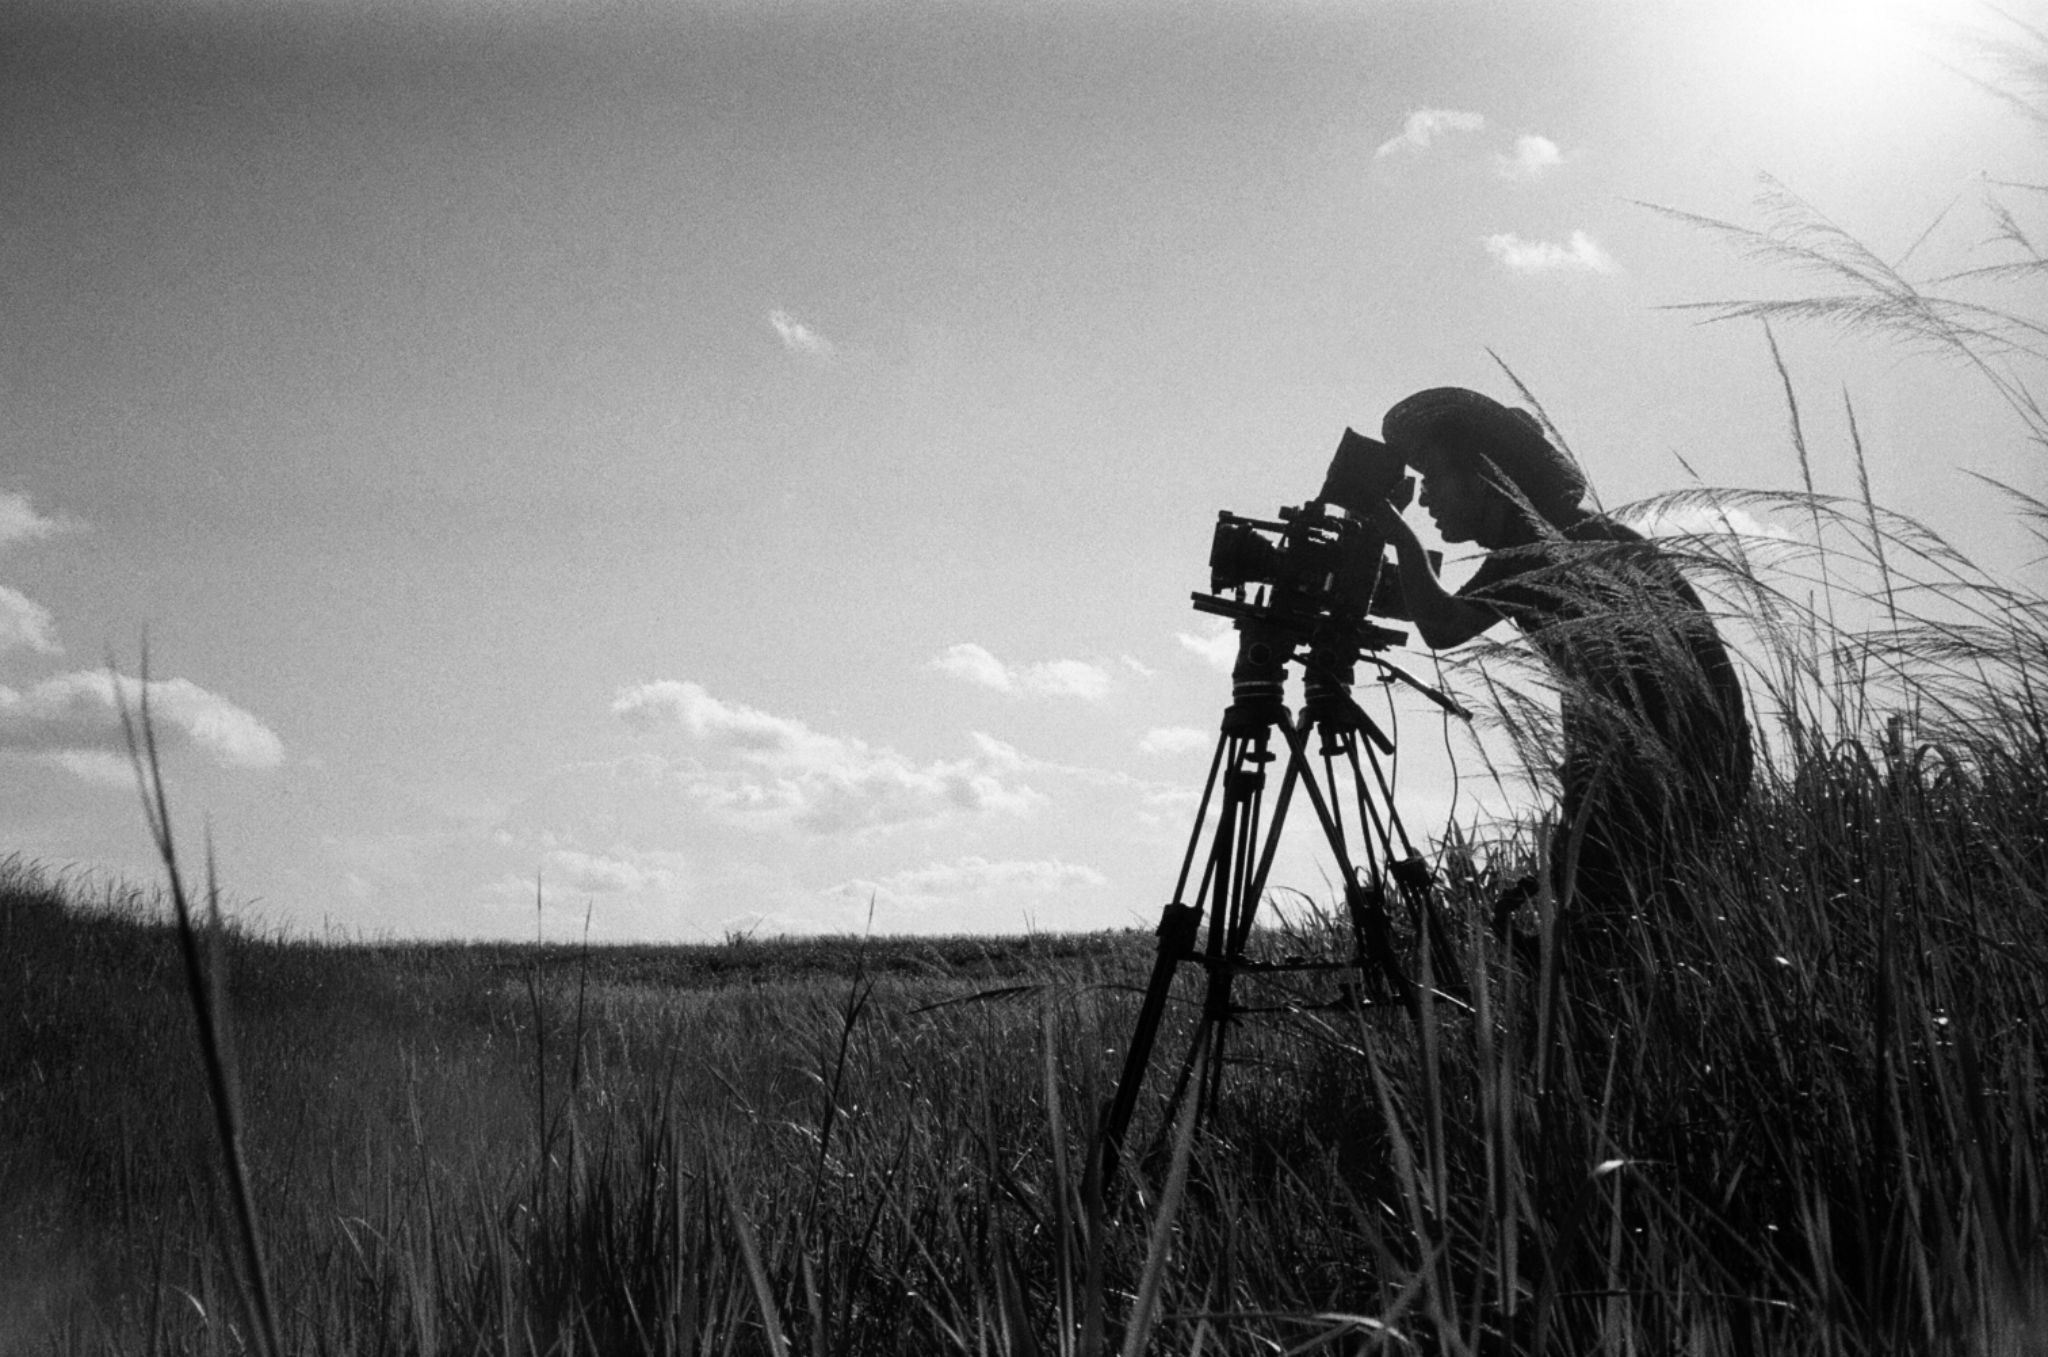 HD Cameras to Capture High Quality Film Footage and Where to Purchase Them Black and white side profile of male crew member using a video camera in a field